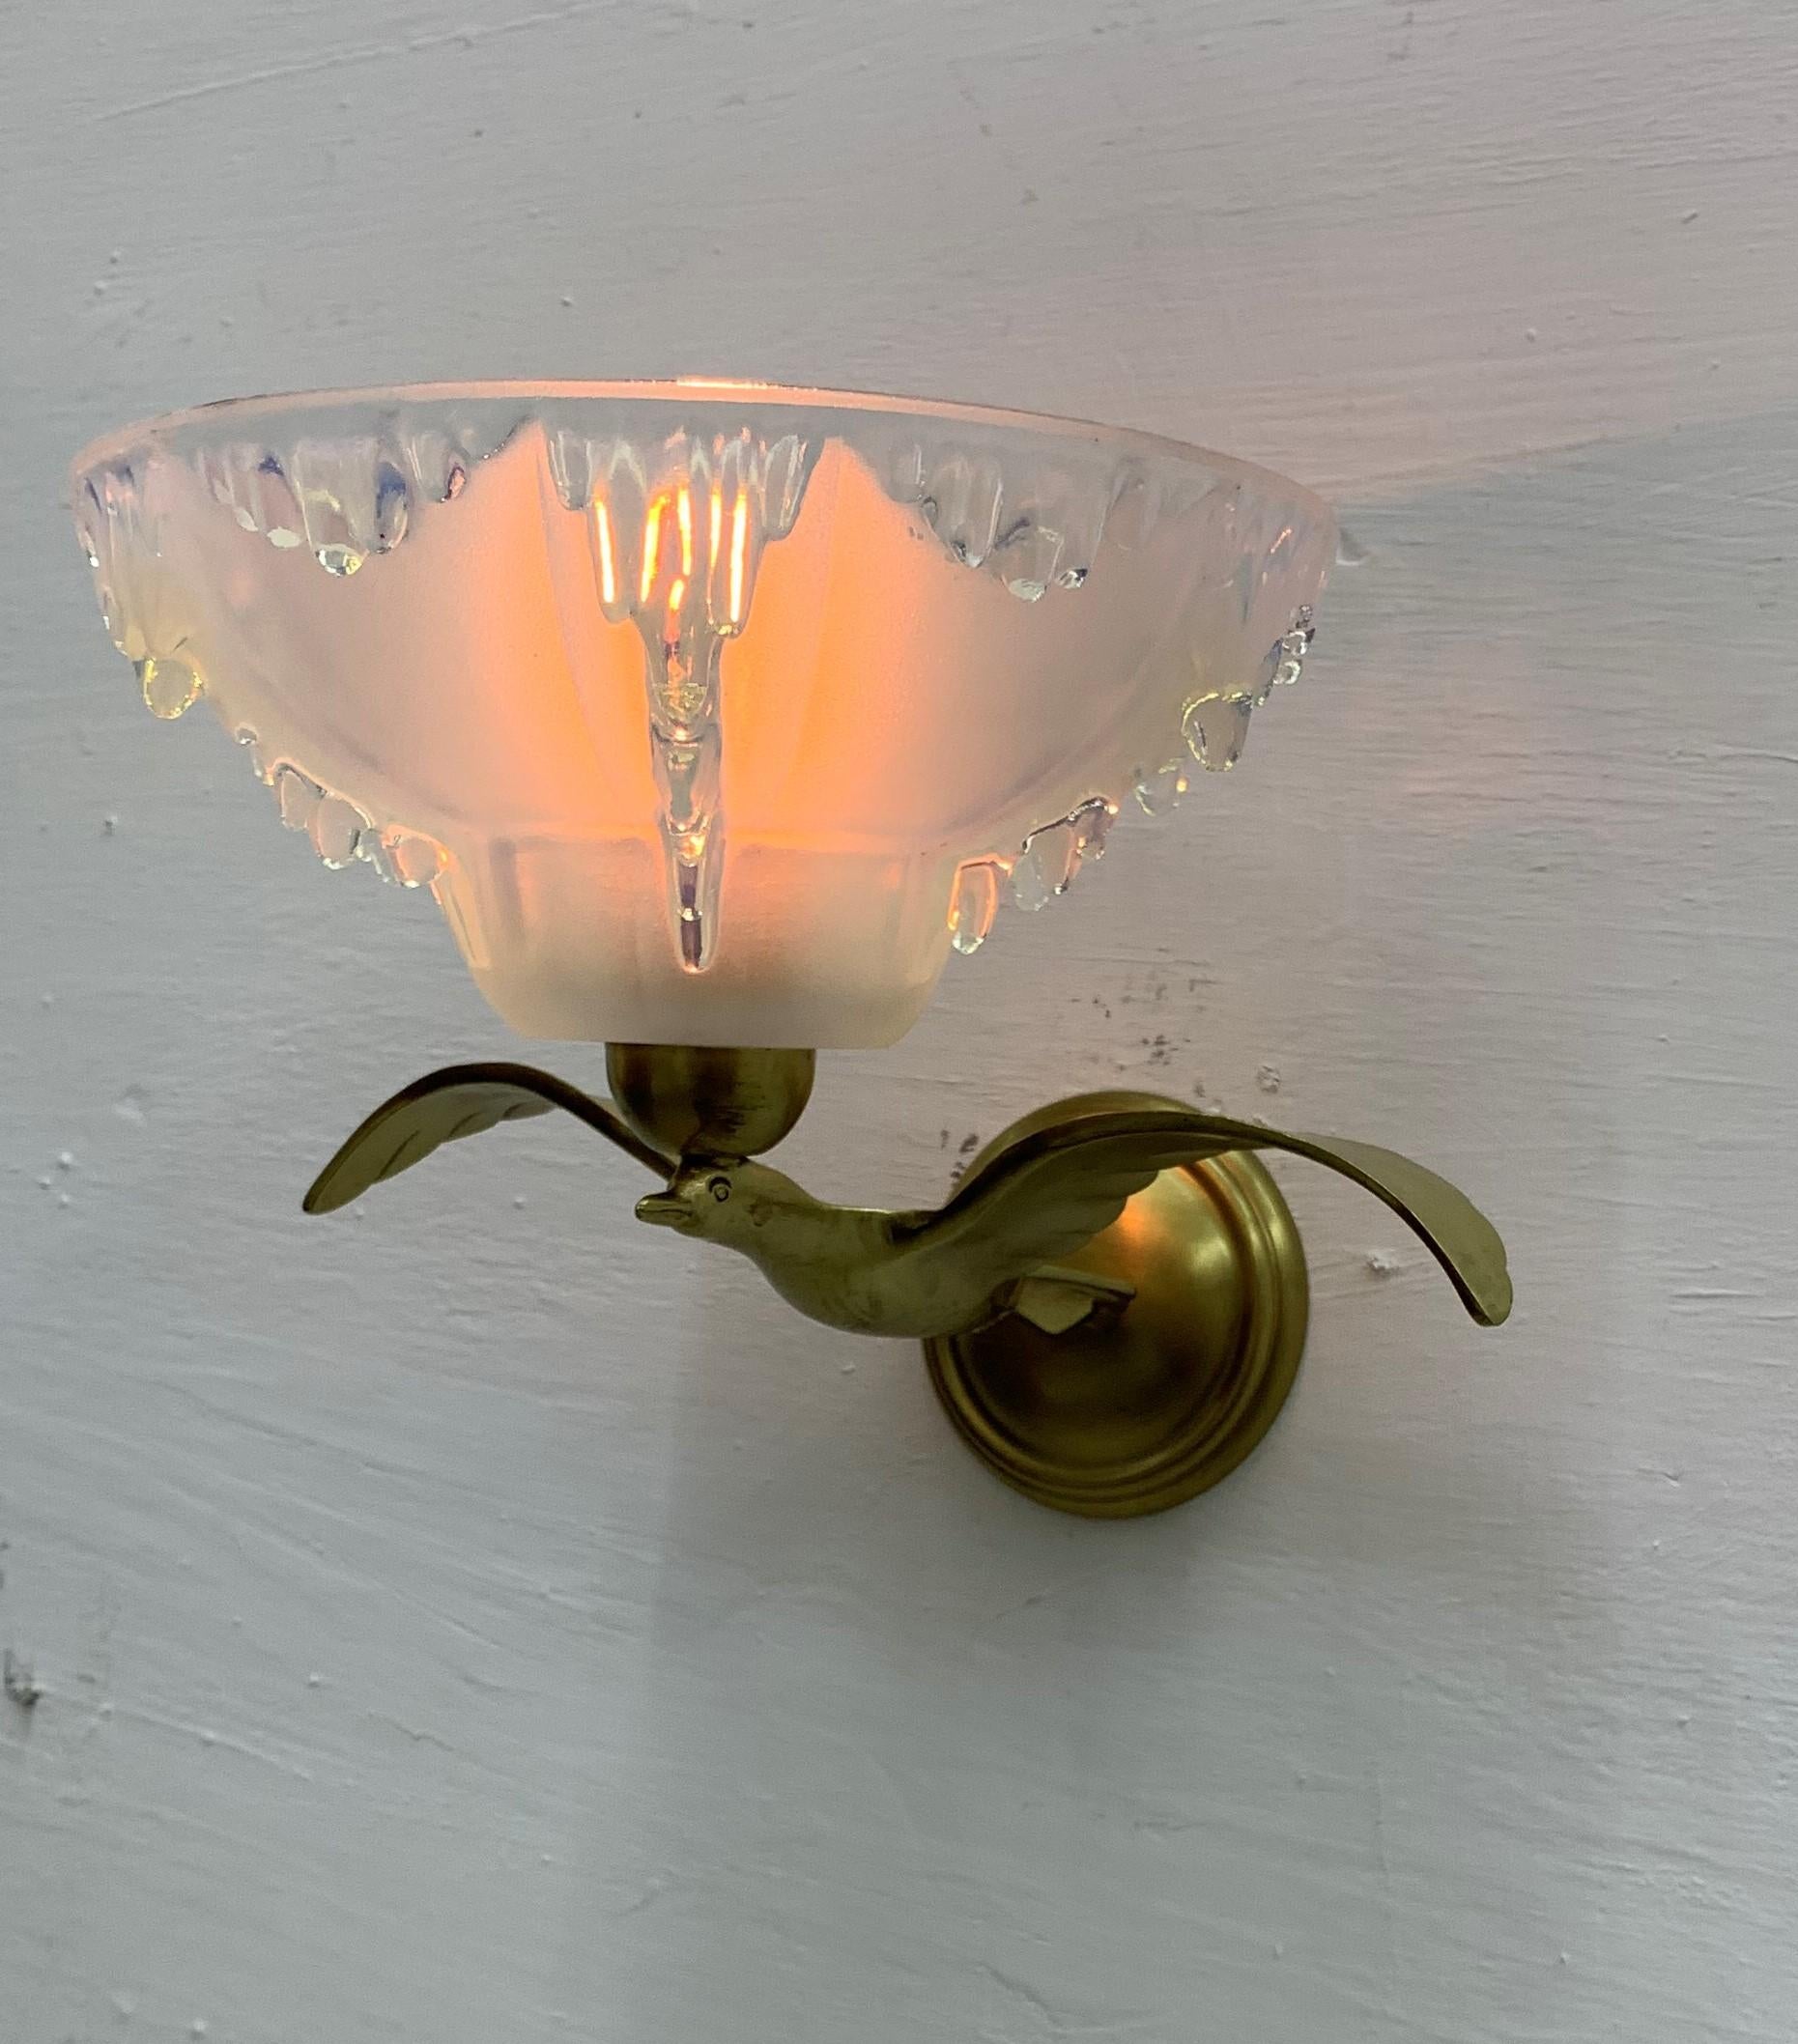 3 Art Deco sconces in the shape of birds holding an opalescent moulded glass shade signed by Ezan.
Priced individually.